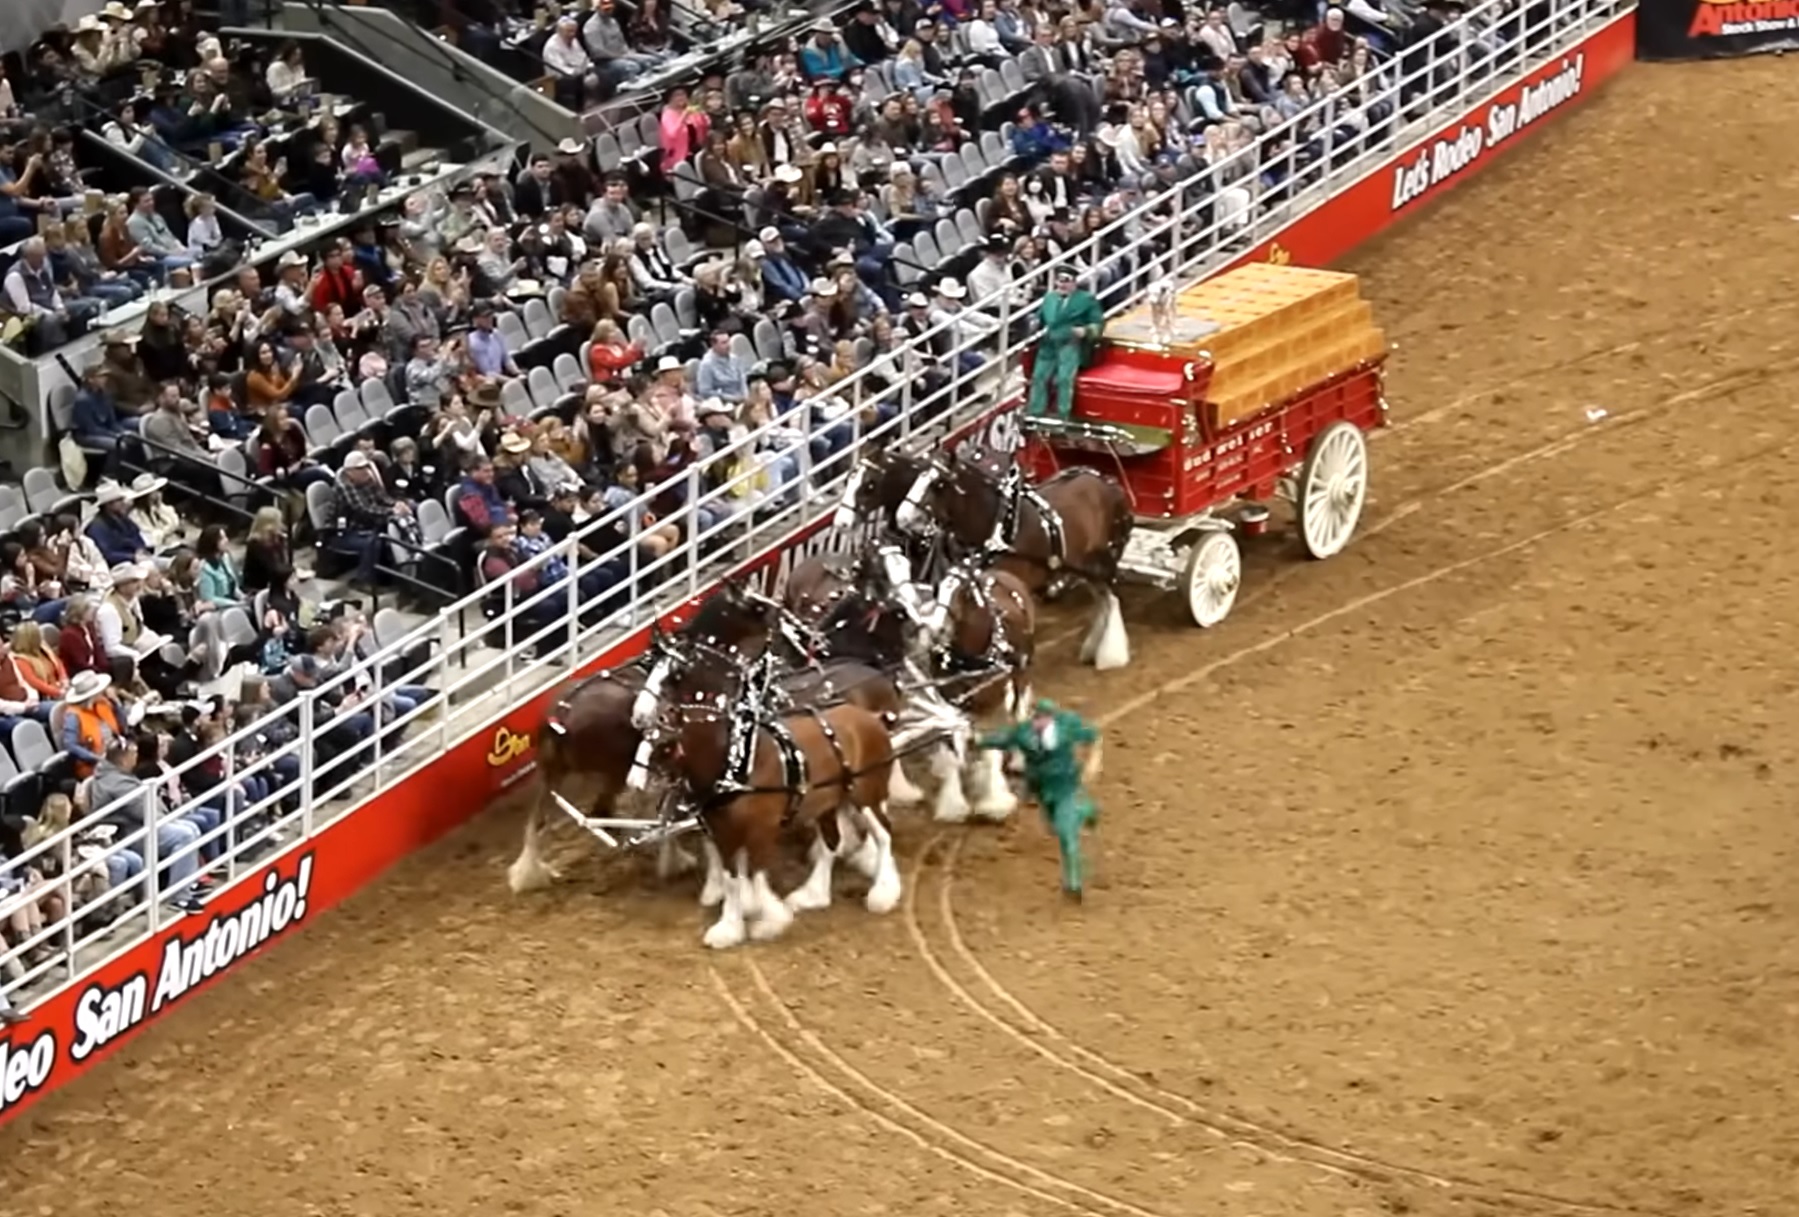 San Antonio rodeo Clydesdale horse collapse goes viral